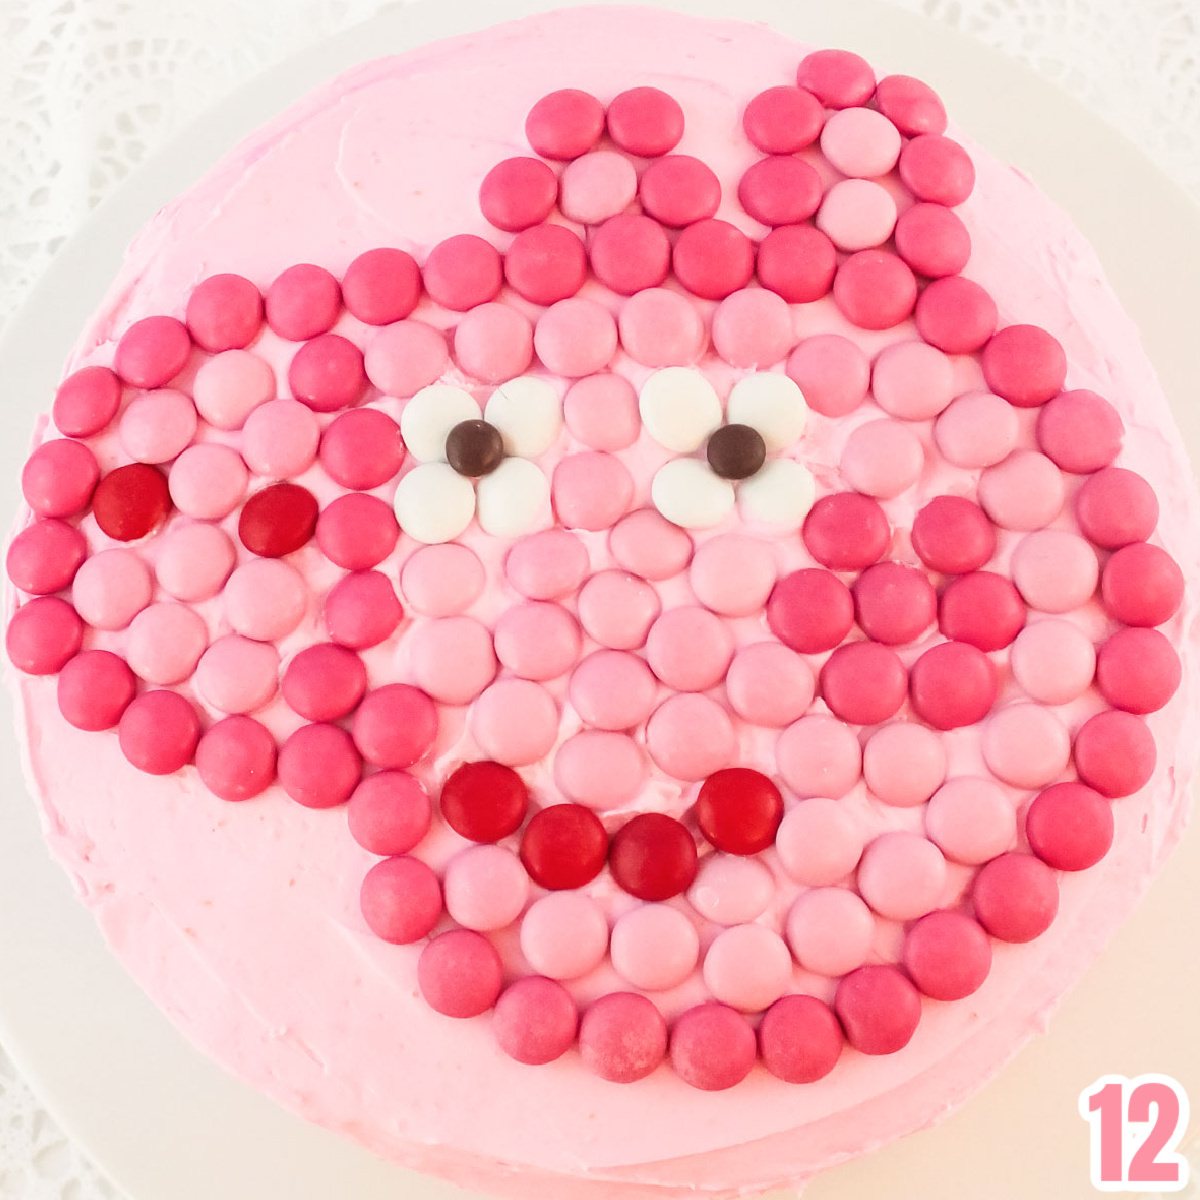 Closeup on the top of a Peppa Pig Cake showing the Peppa face made out of Pink M&M's.